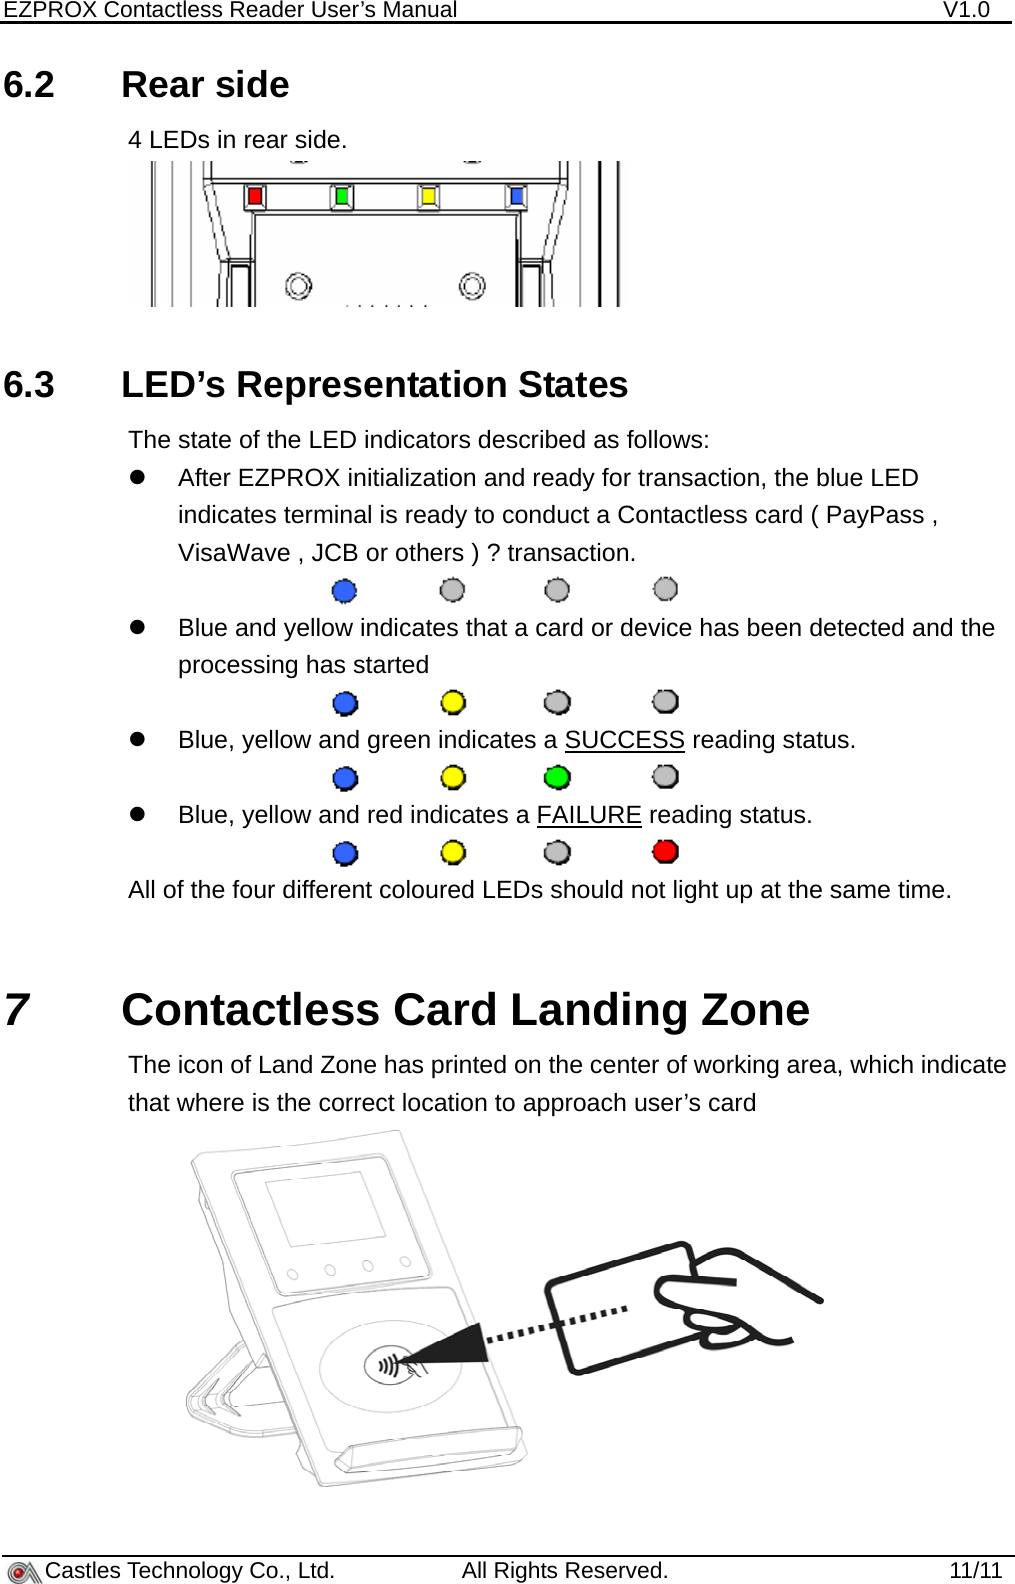 EZPROX Contactless Reader User’s Manual    V1.0     Castles Technology Co., Ltd.           All Rights Reserved.                           11/116.2 Rear side 4 LEDs in rear side.  6.3  LED’s Representation States The state of the LED indicators described as follows: z  After EZPROX initialization and ready for transaction, the blue LED indicates terminal is ready to conduct a Contactless card ( PayPass , VisaWave , JCB or others ) ? transaction.  z  Blue and yellow indicates that a card or device has been detected and the processing has started  z  Blue, yellow and green indicates a SUCCESS reading status.  z  Blue, yellow and red indicates a FAILURE reading status.  All of the four different coloured LEDs should not light up at the same time.  7  Contactless Card Landing Zone The icon of Land Zone has printed on the center of working area, which indicate that where is the correct location to approach user’s card  